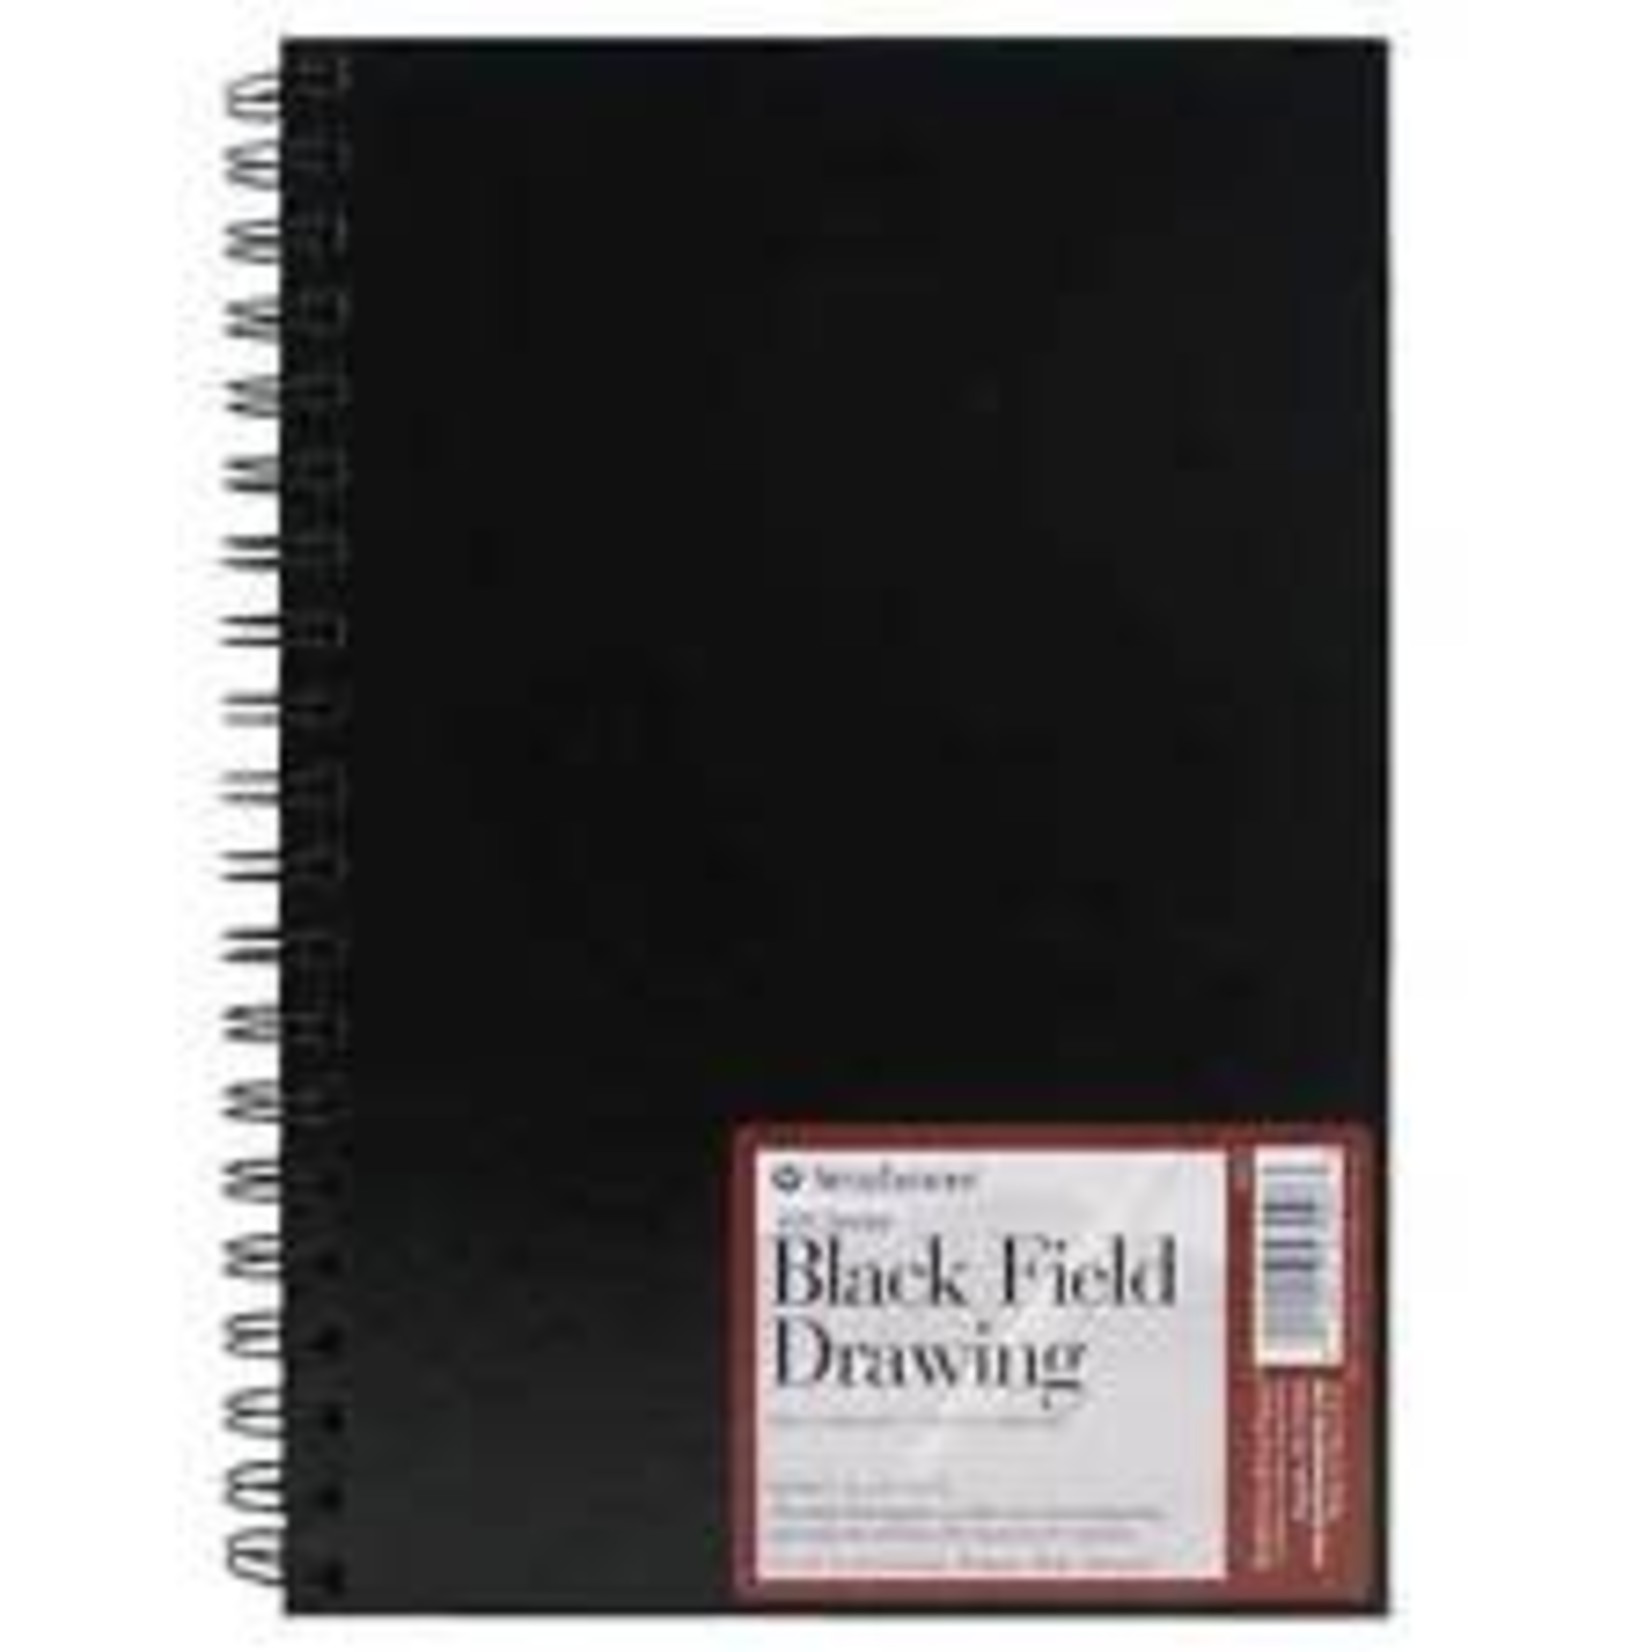 STRATHMORE STRATHMORE BLACK FIELD DRAWING SKETCH BOOK 7X10